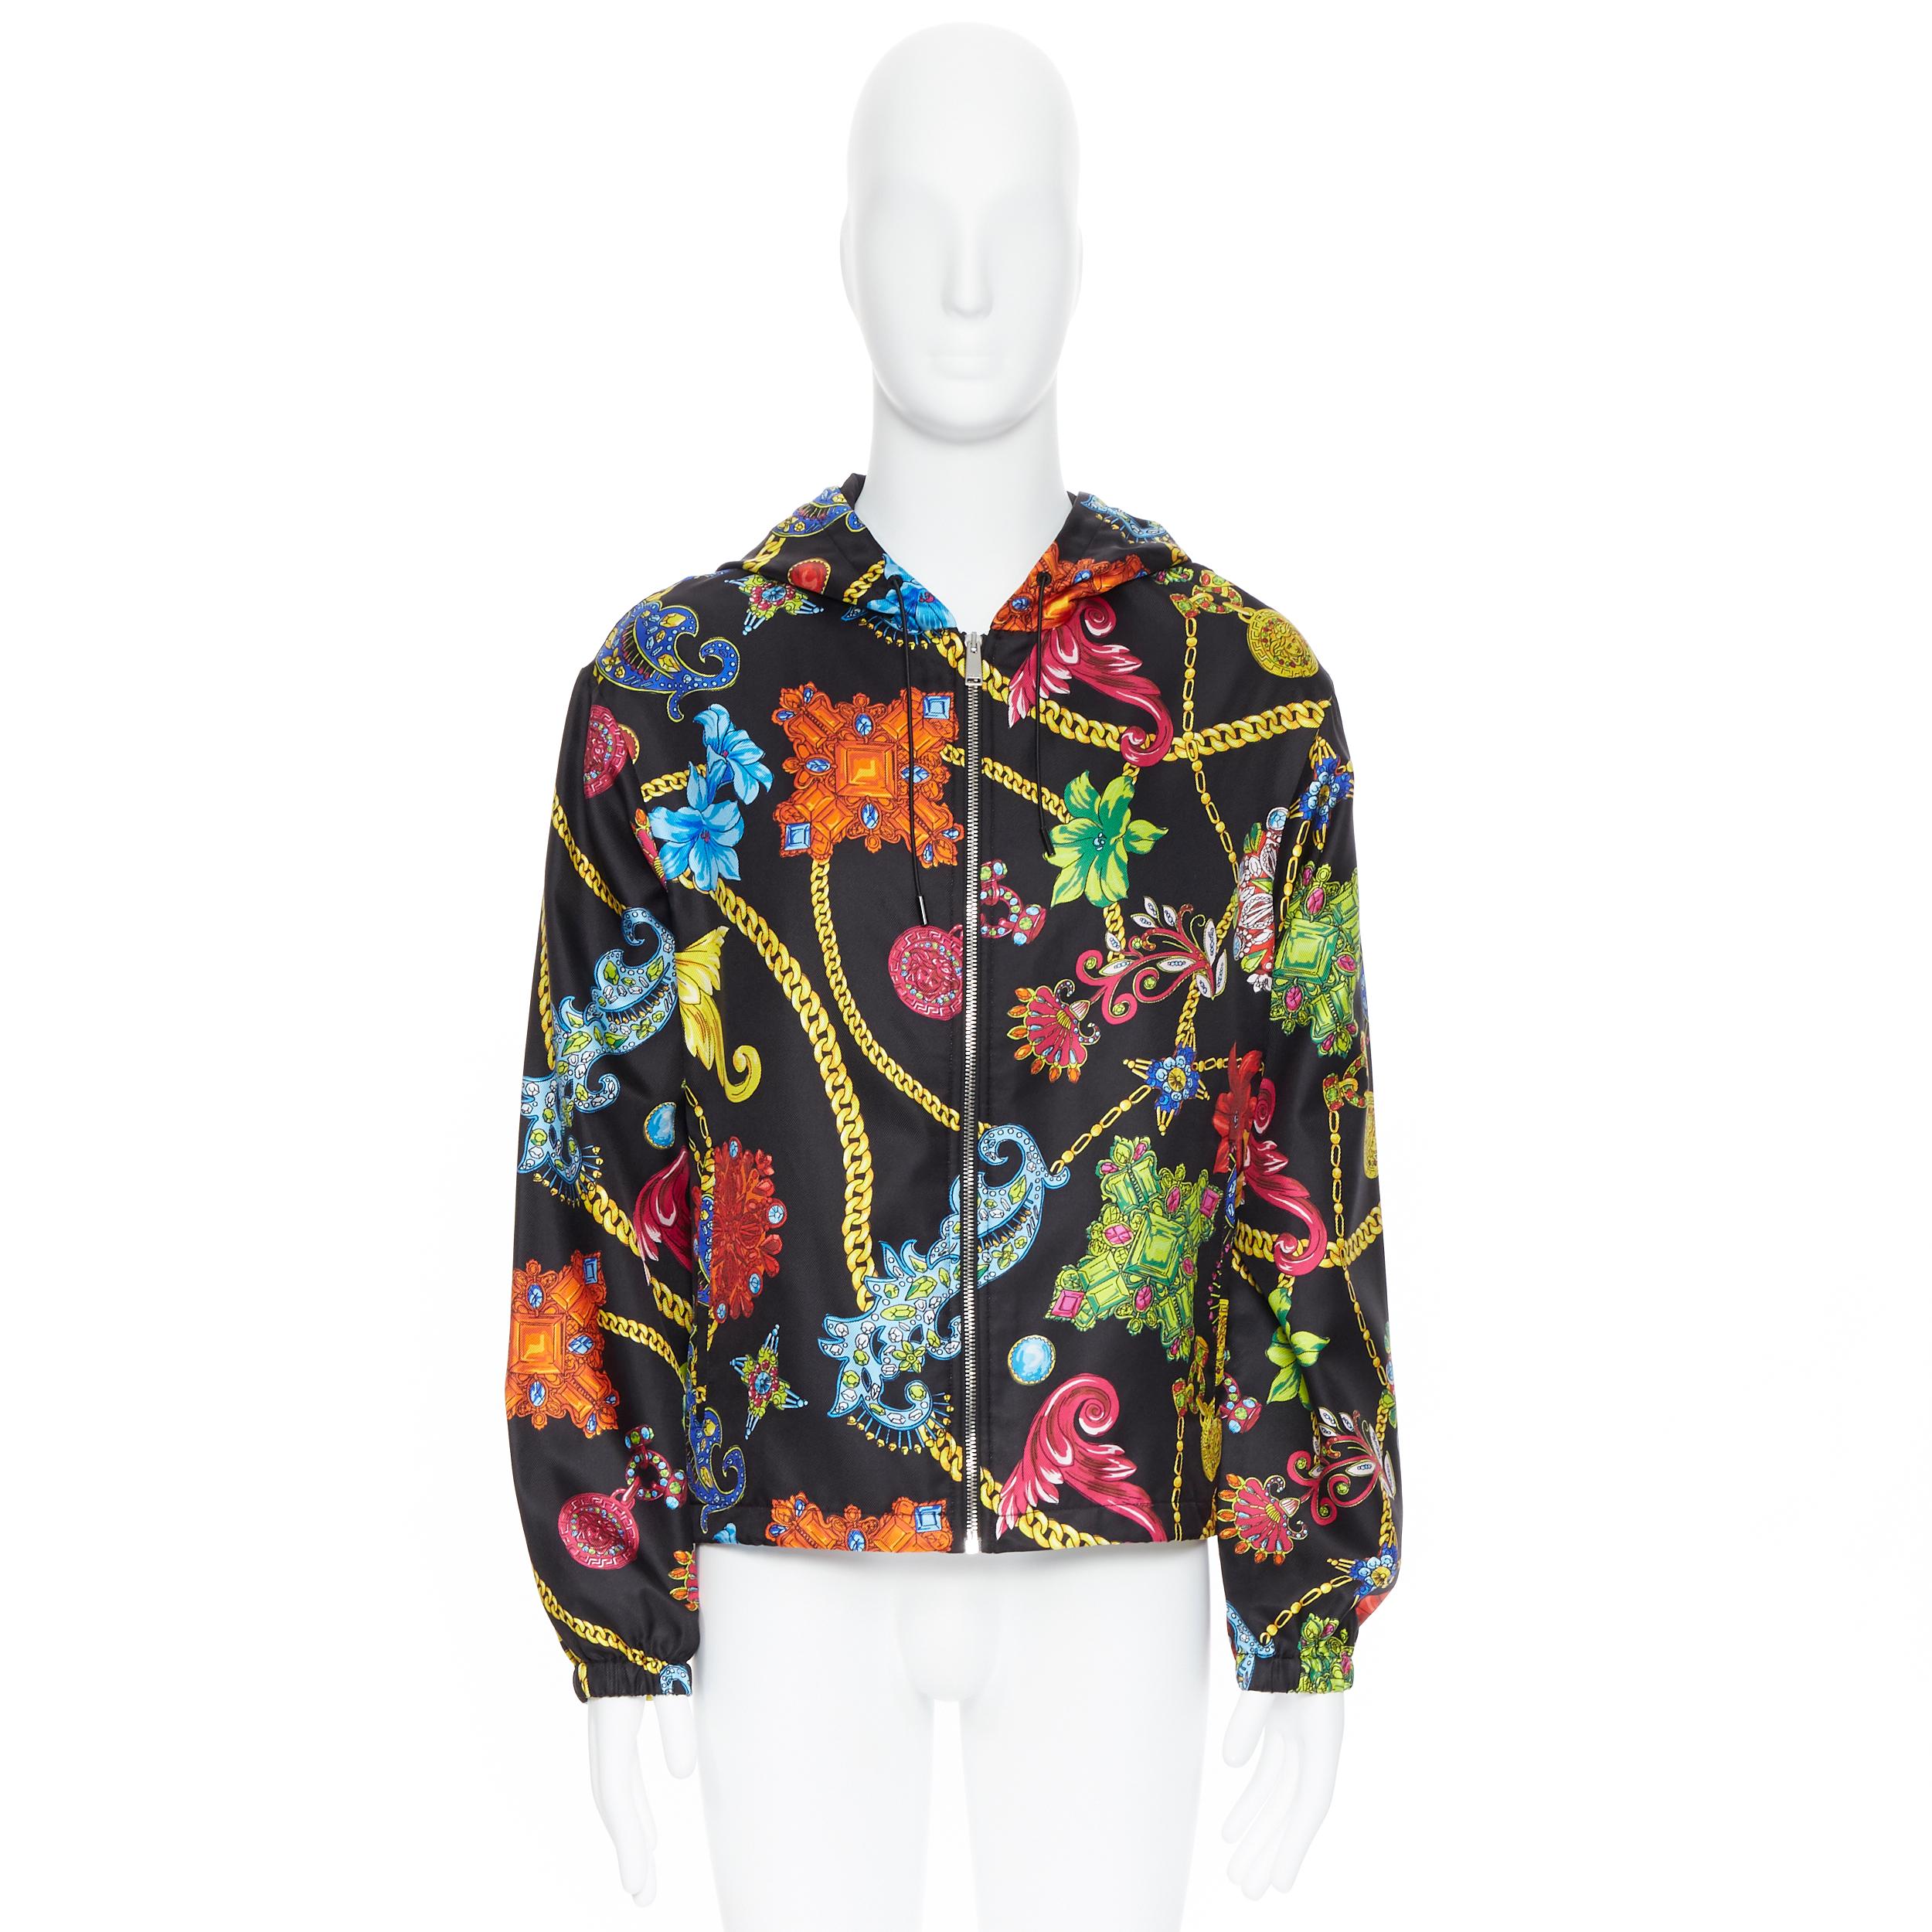 new VERSACE 100% silk SS19 Vintage Jewel Floral print hoodie jacket IT52 XL
Brand: Versace
Designer: Donatella Versace
Collection: 2019
Model Name / Style: Silk hoodie
Material: Silk
Color: Multicolour
Pattern: Floral
Closure: Zip
Extra Detail: 100%